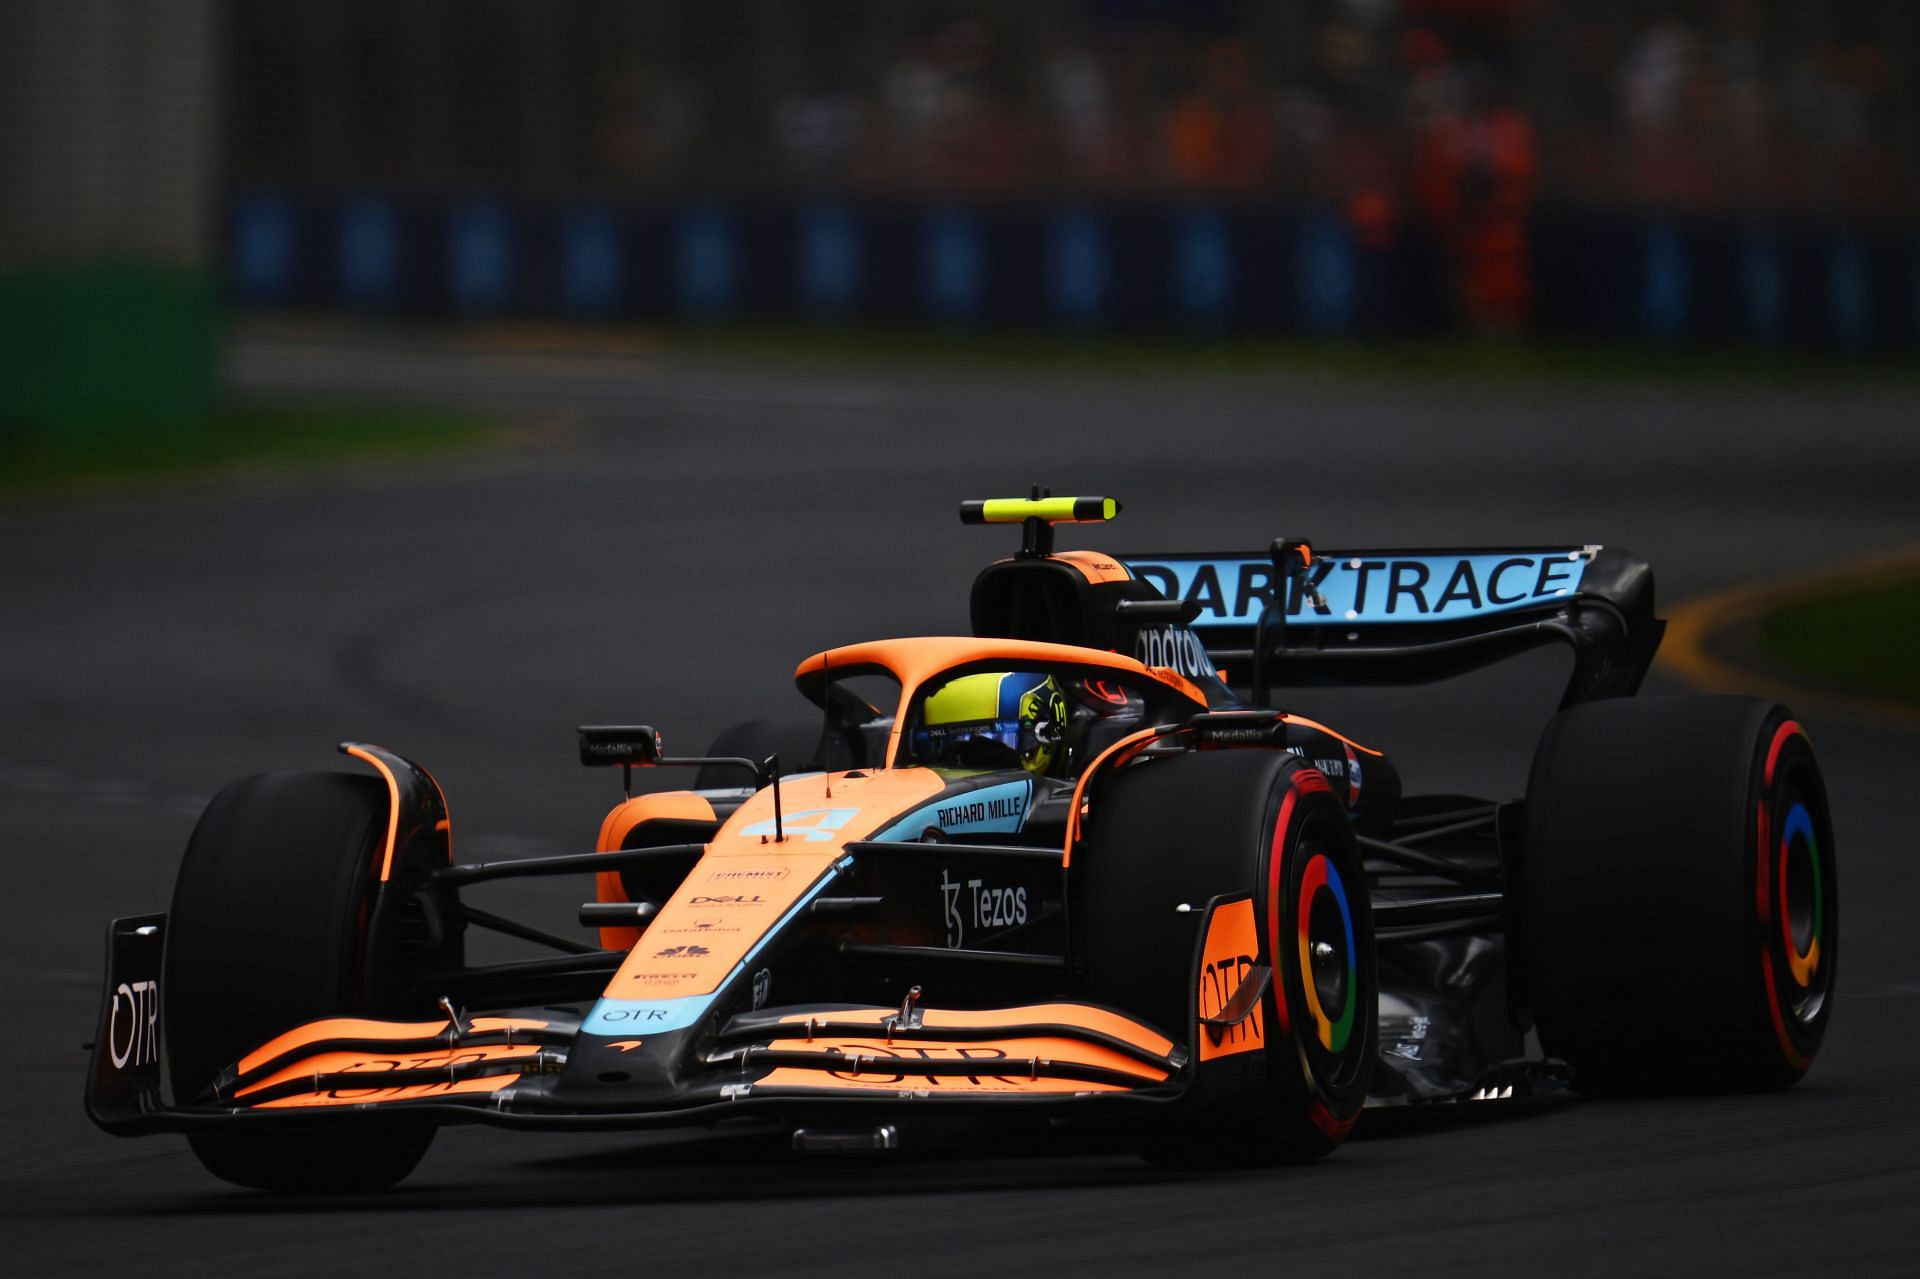 Mclaren topped the timesheets in FP3